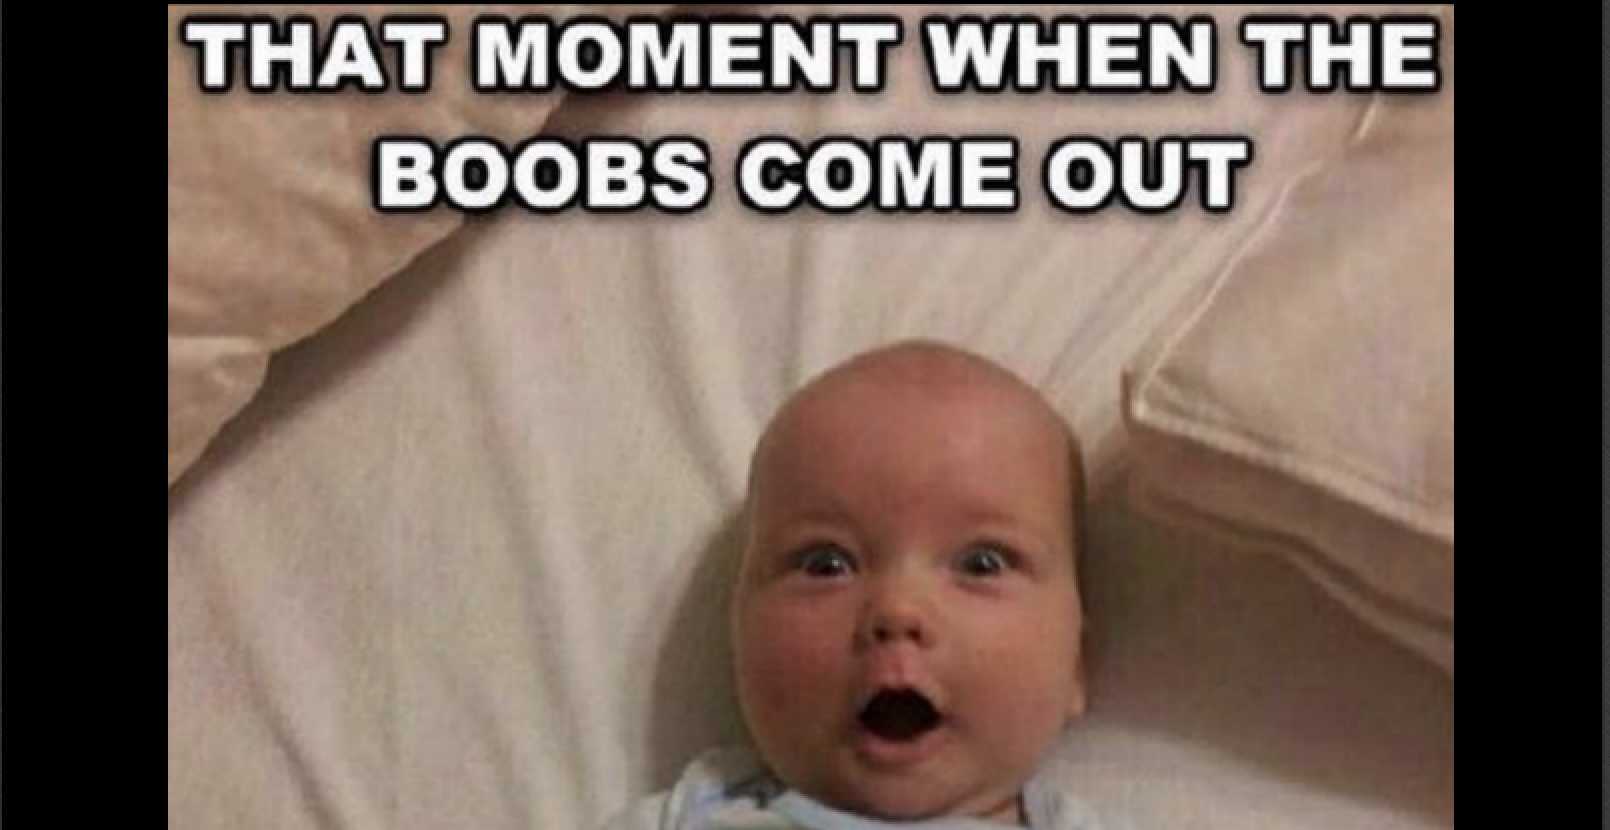 40 Memes That Perfectly Capture the Hilarity That Is Breastfeeding.